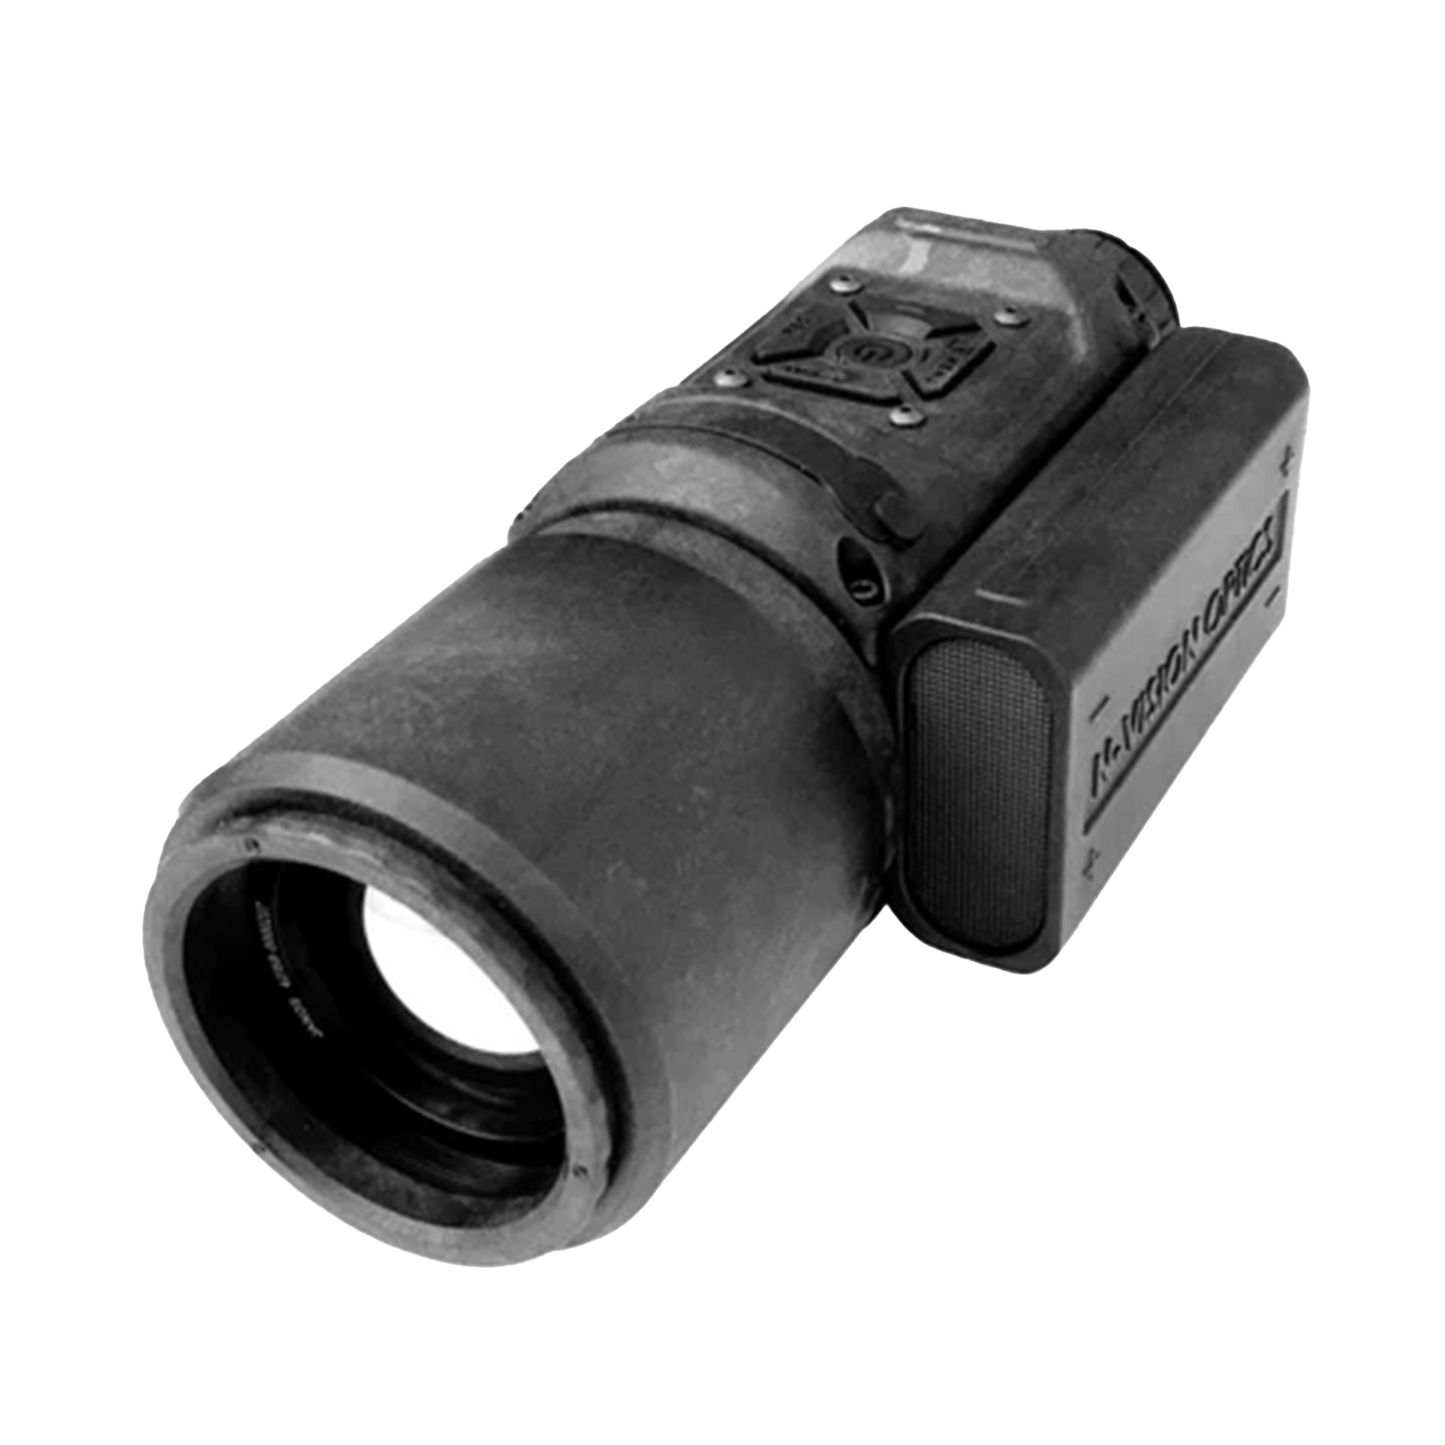 N-VISION HALO-X35 THERMAL SCOPE 640X480 2.5-20X